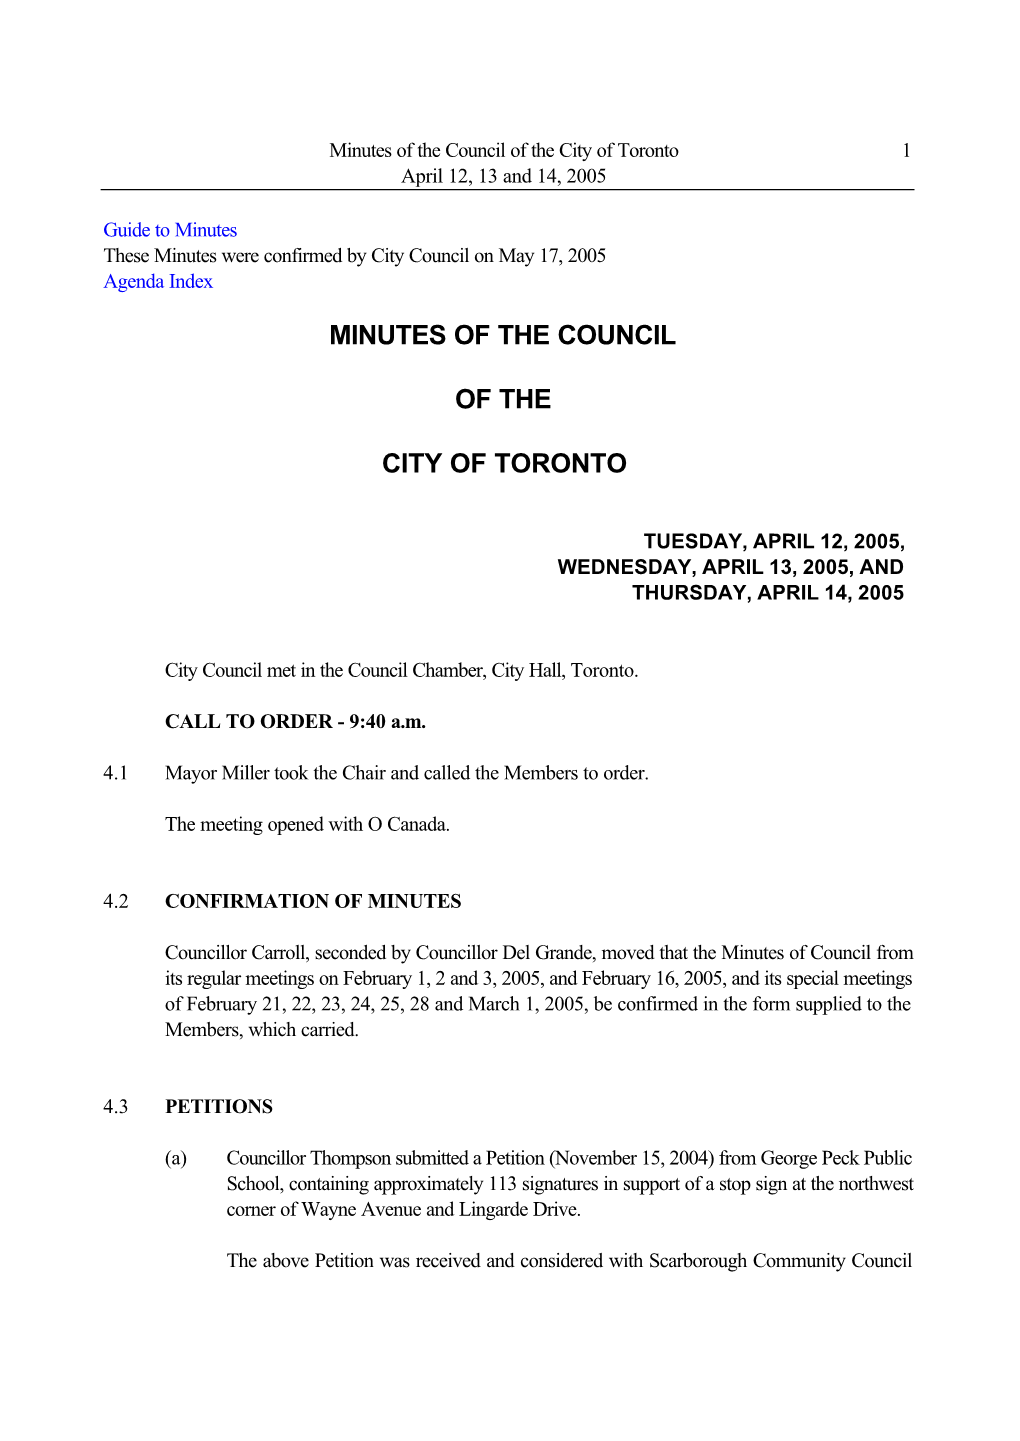 Minutes of the Council of the City of Toronto 1 April 12, 13 and 14, 2005